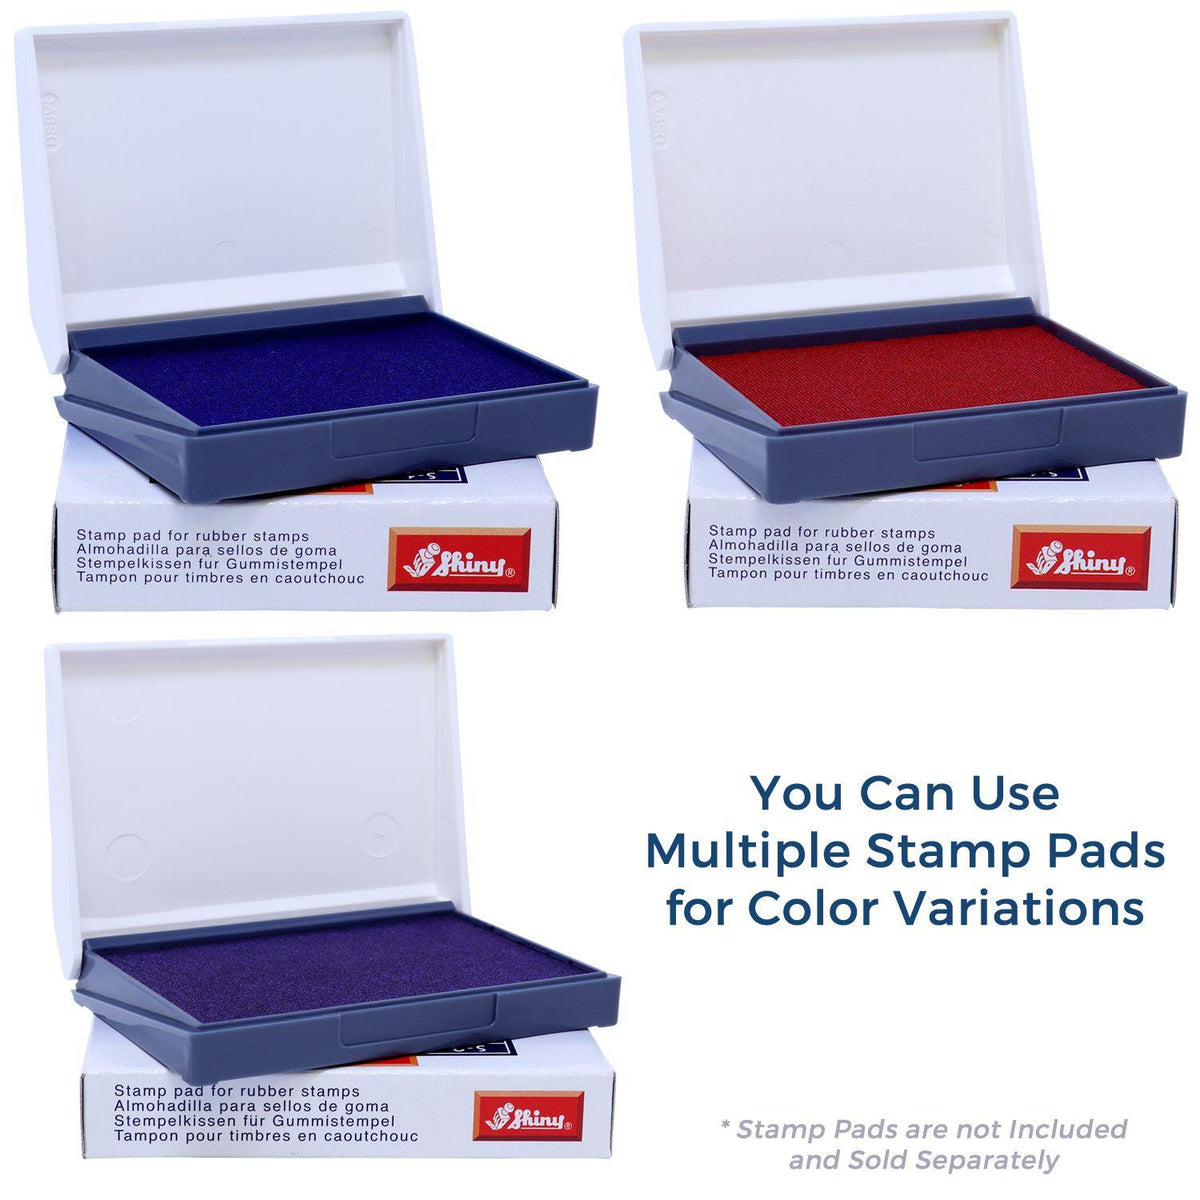 Stamp Pads for Great Rubber Stamp Available